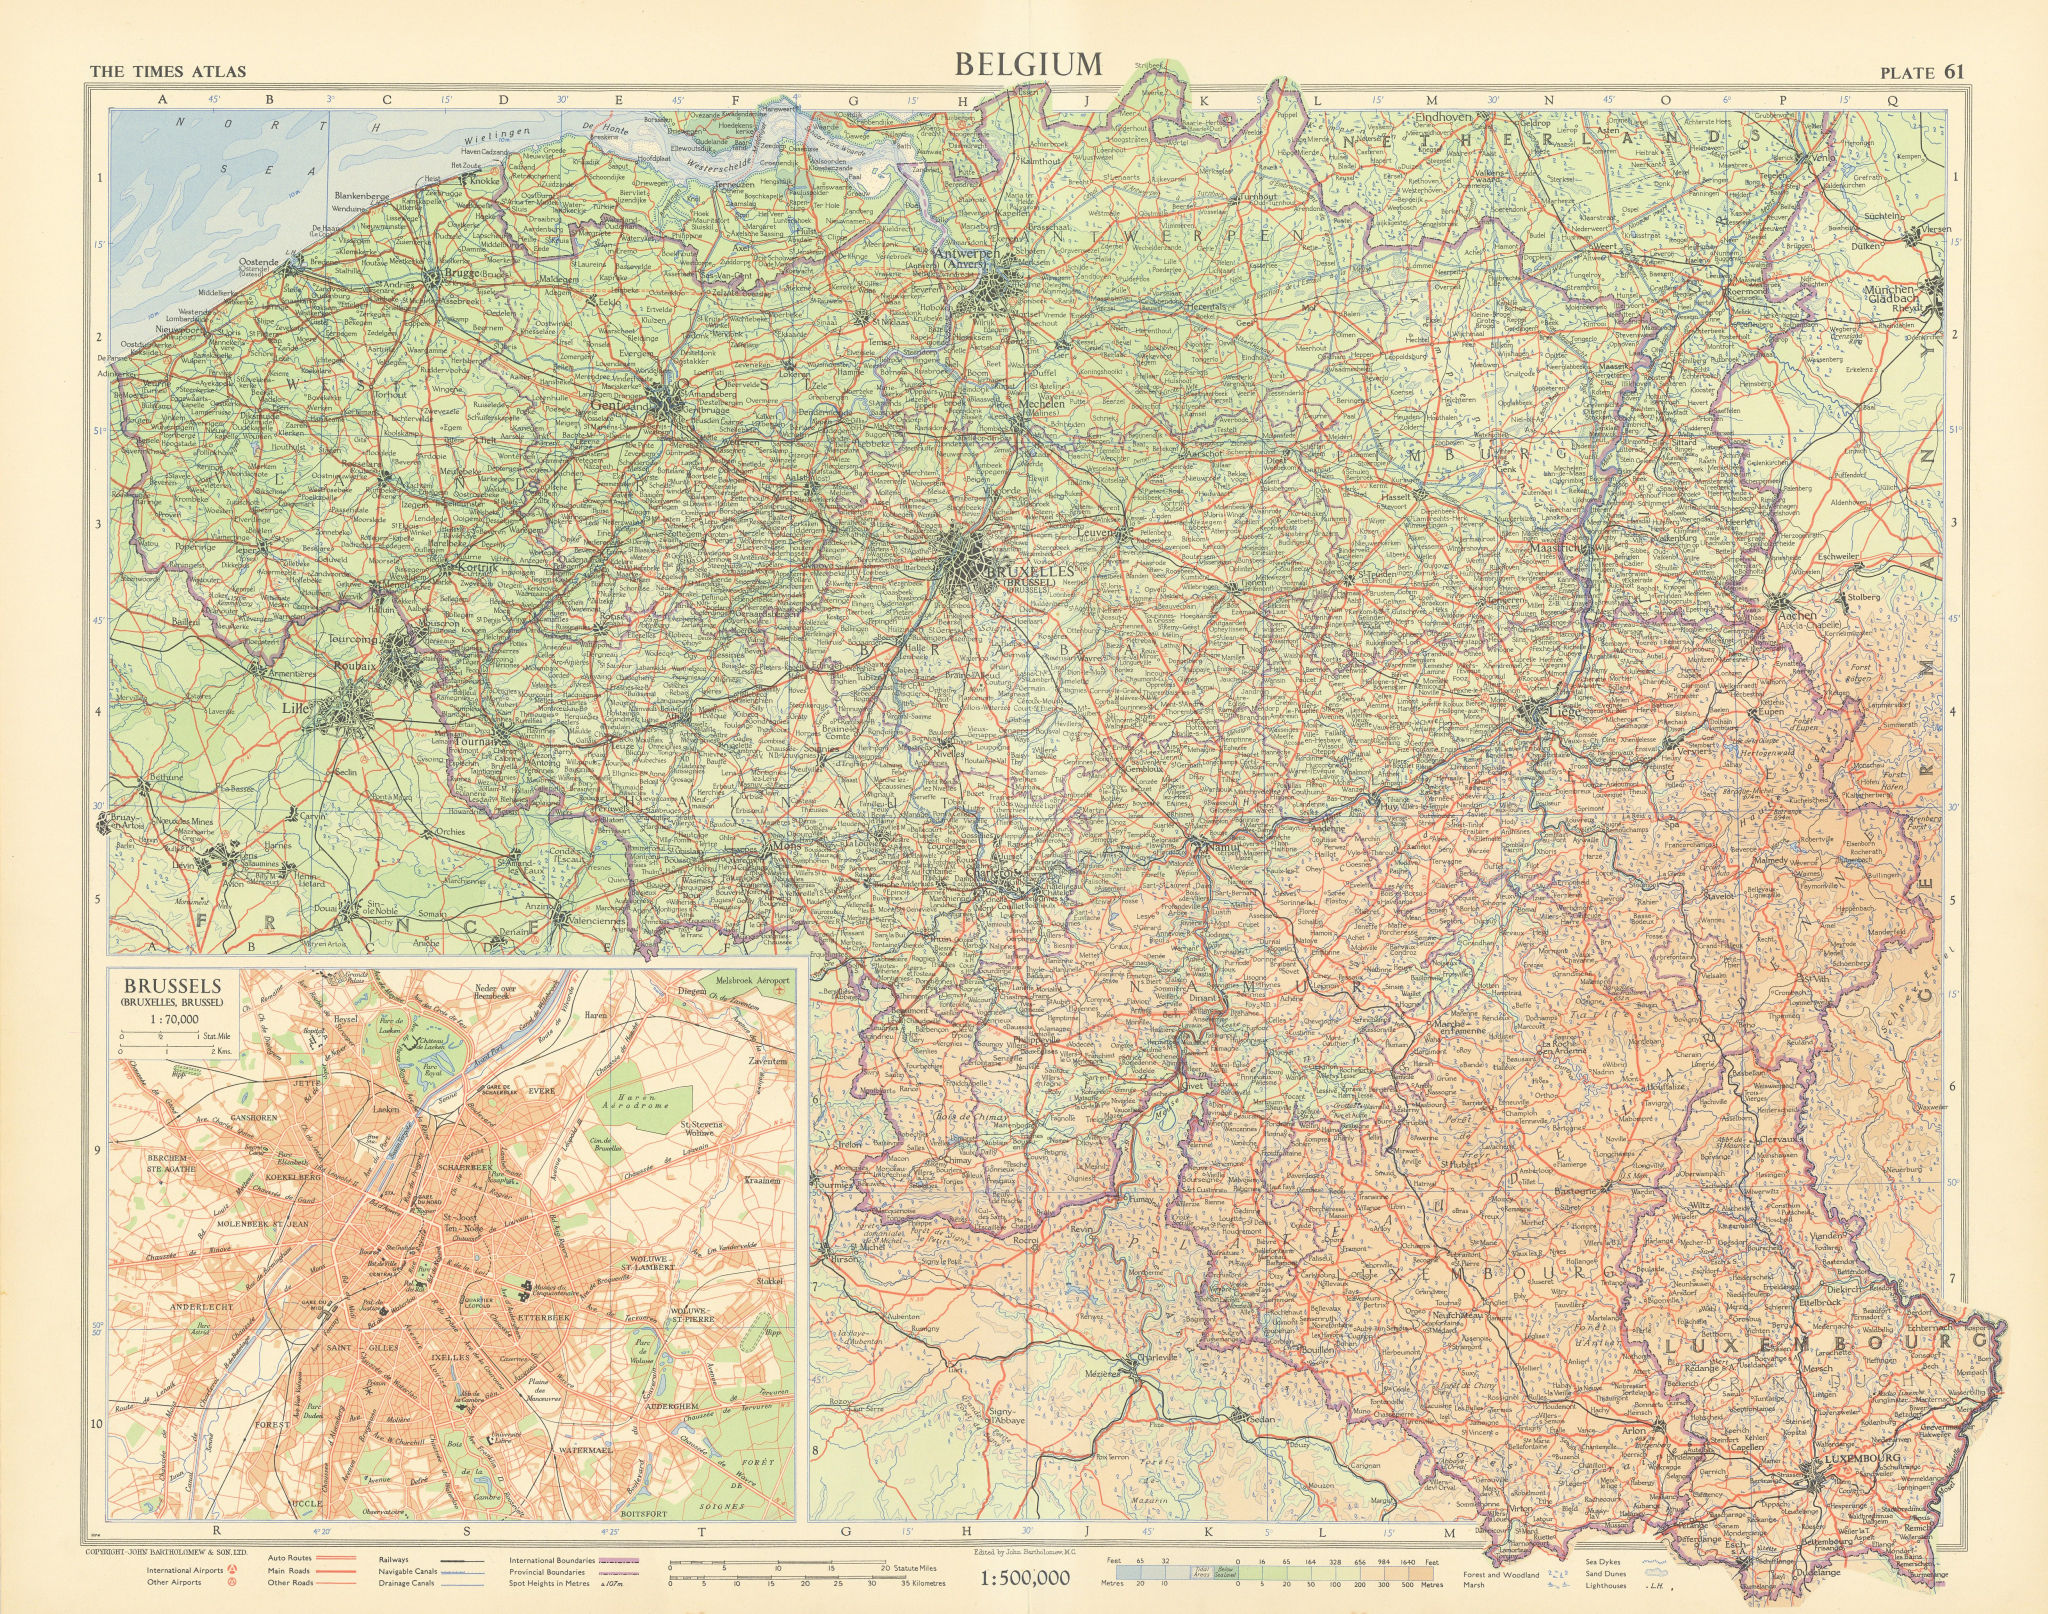 Associate Product Belgium. Brussels Bruxelles plan. Road network. Autoroutes. TIMES 1955 old map